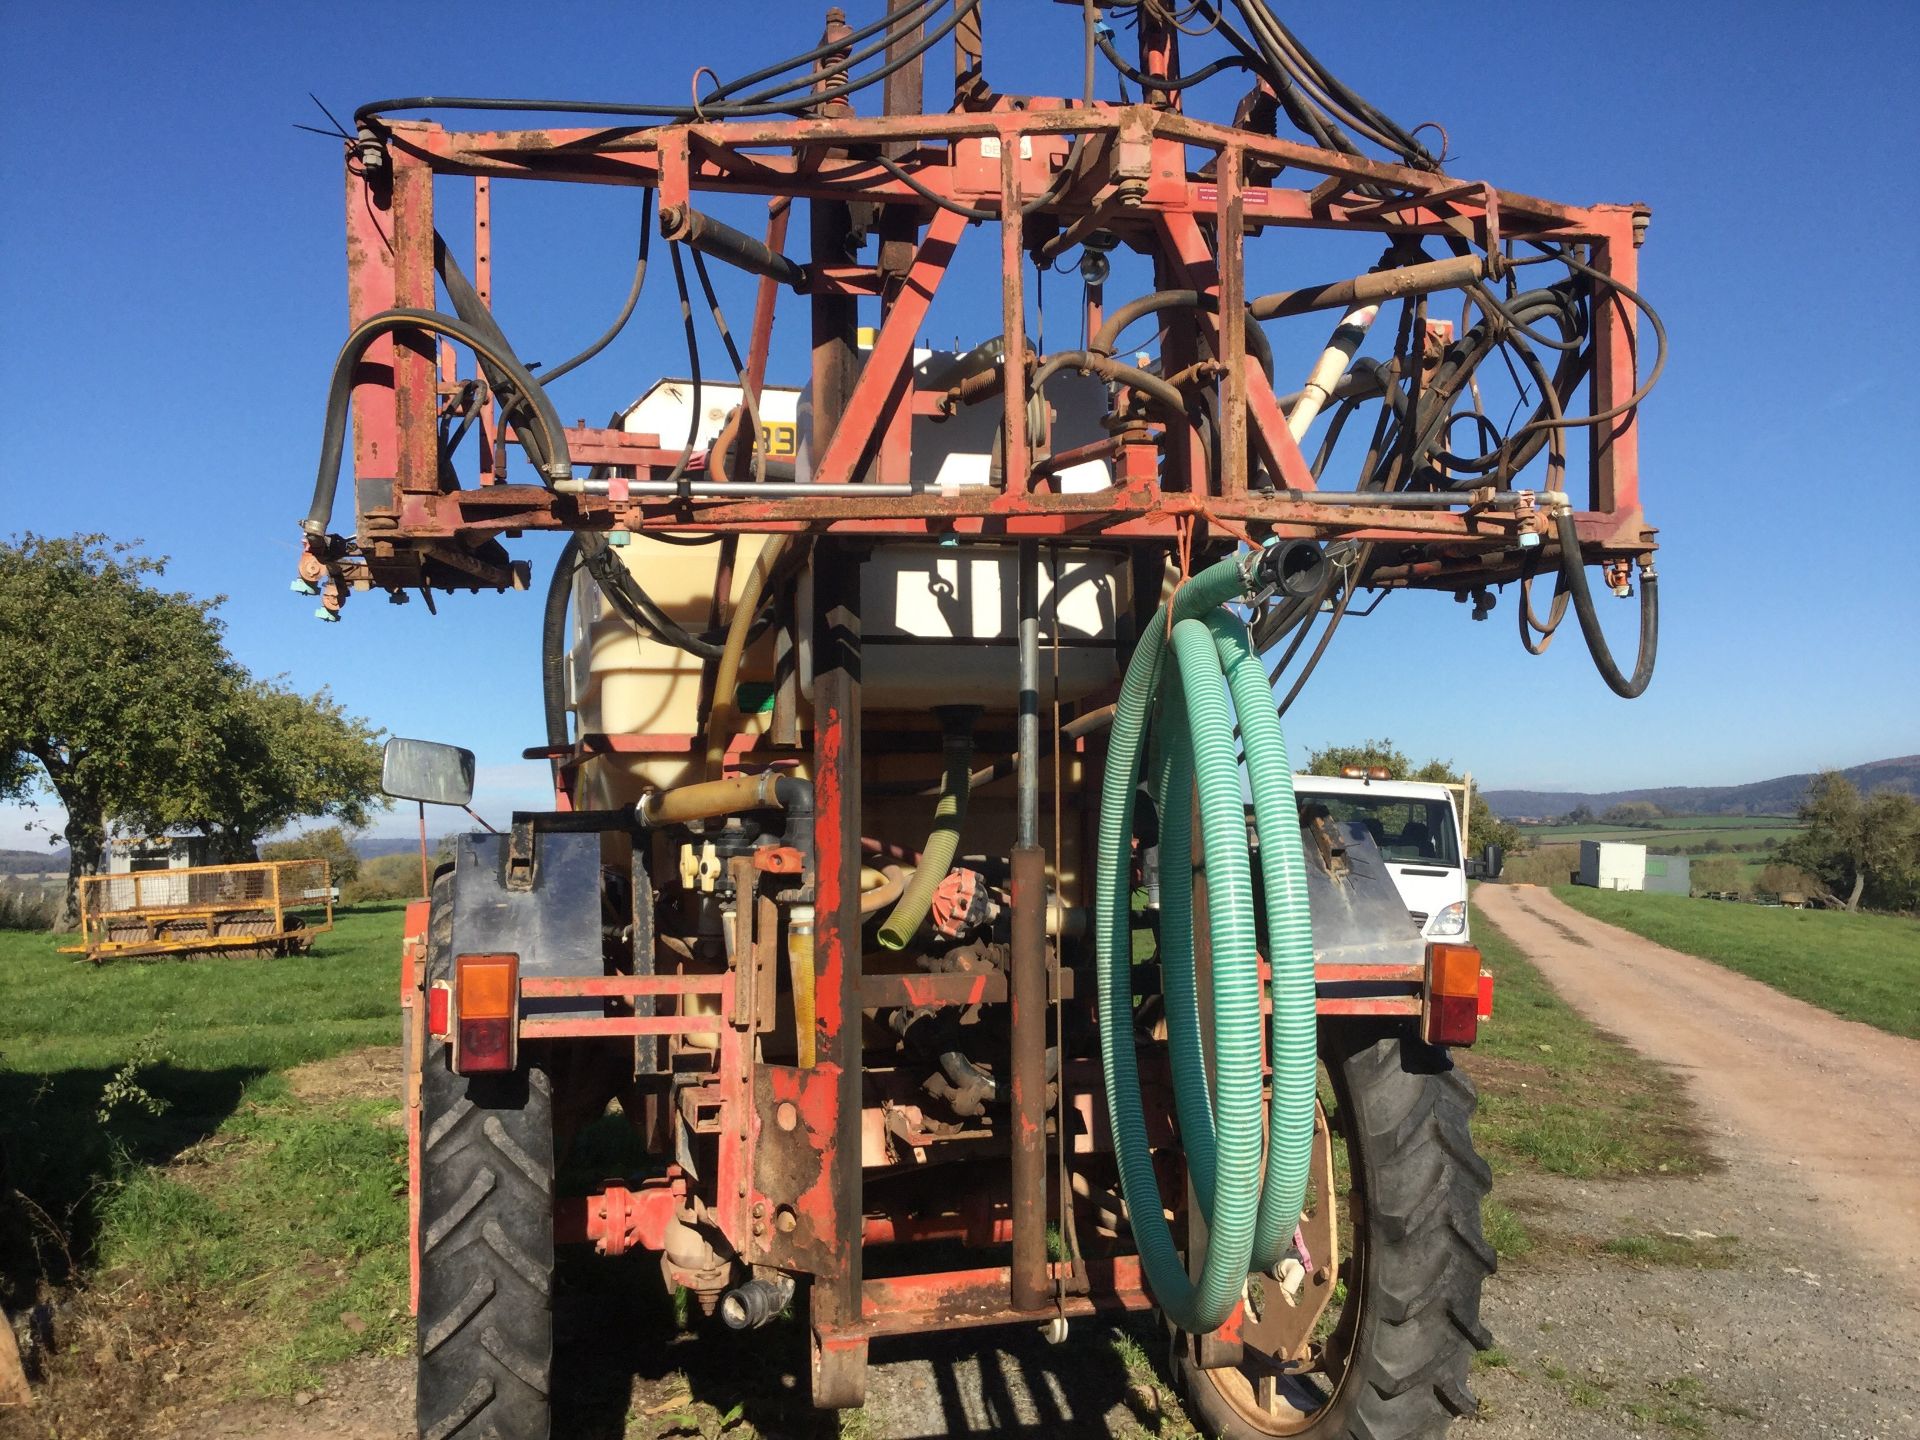 Lily Hit - Trac 250 18 Sprayer With Volkswagen Diesel Engine - Image 3 of 4